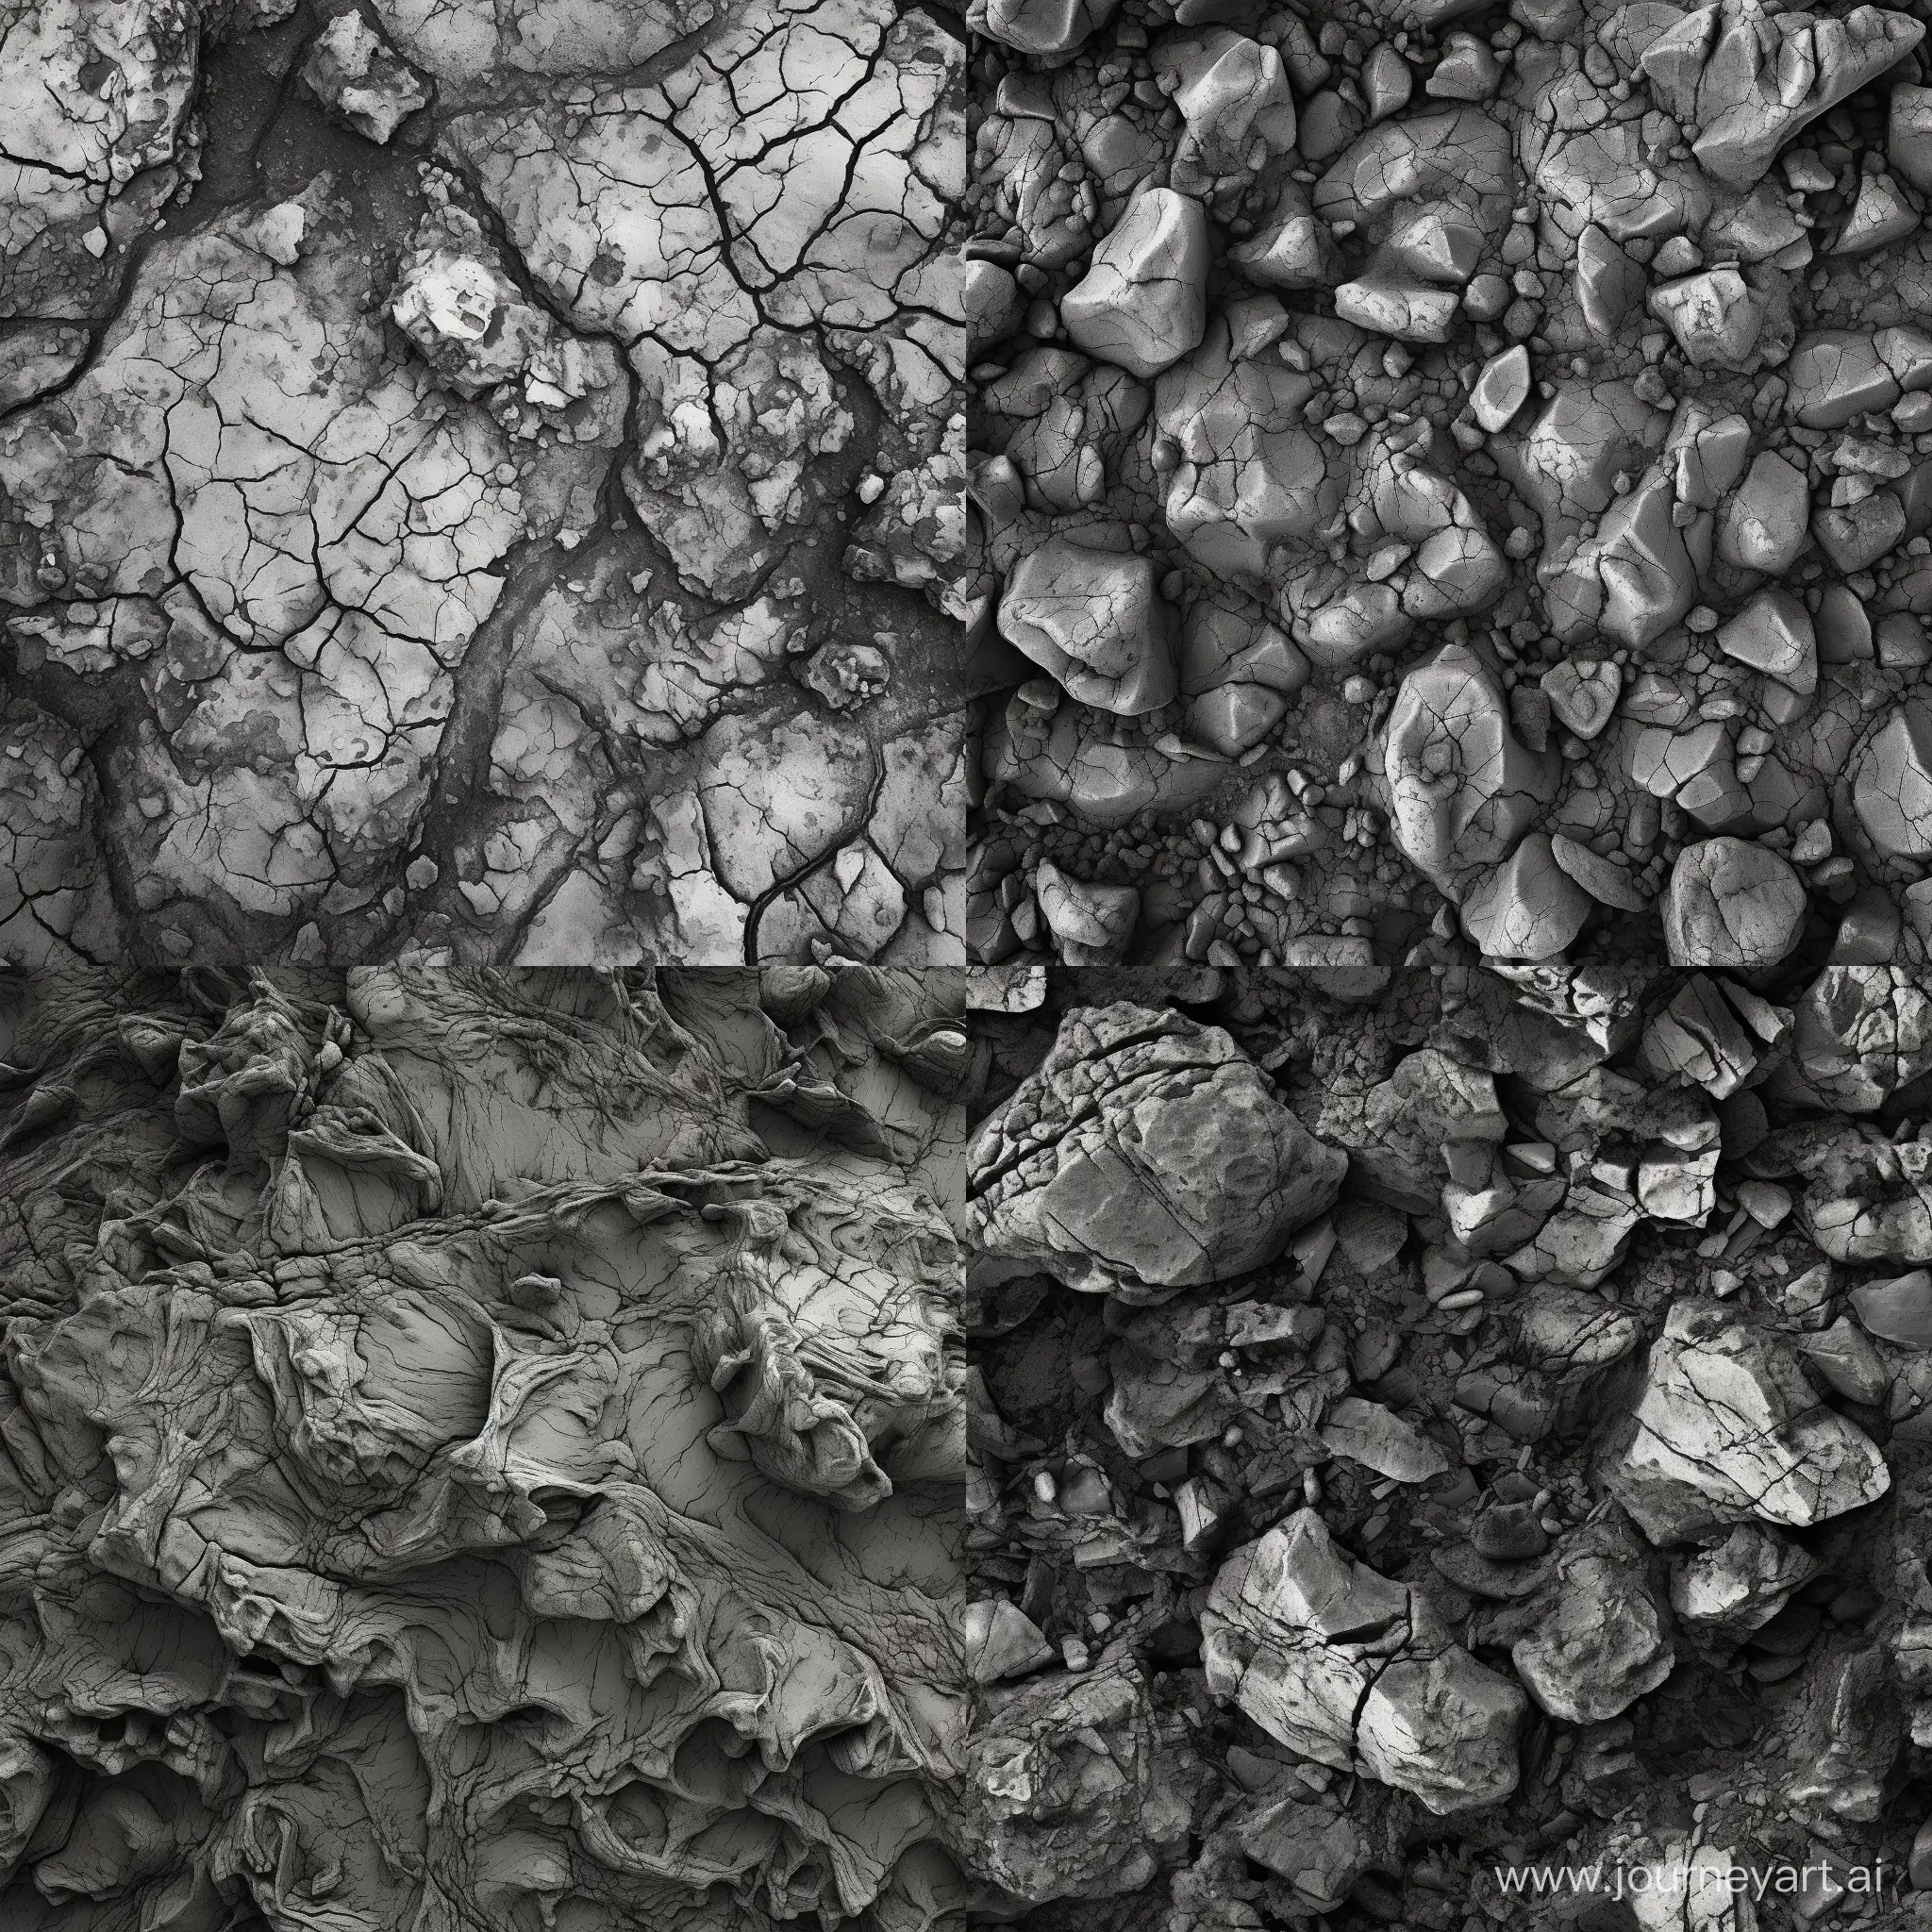 Aerial-View-of-Textured-Rocky-Soil-Realistic-Black-and-White-Landscape